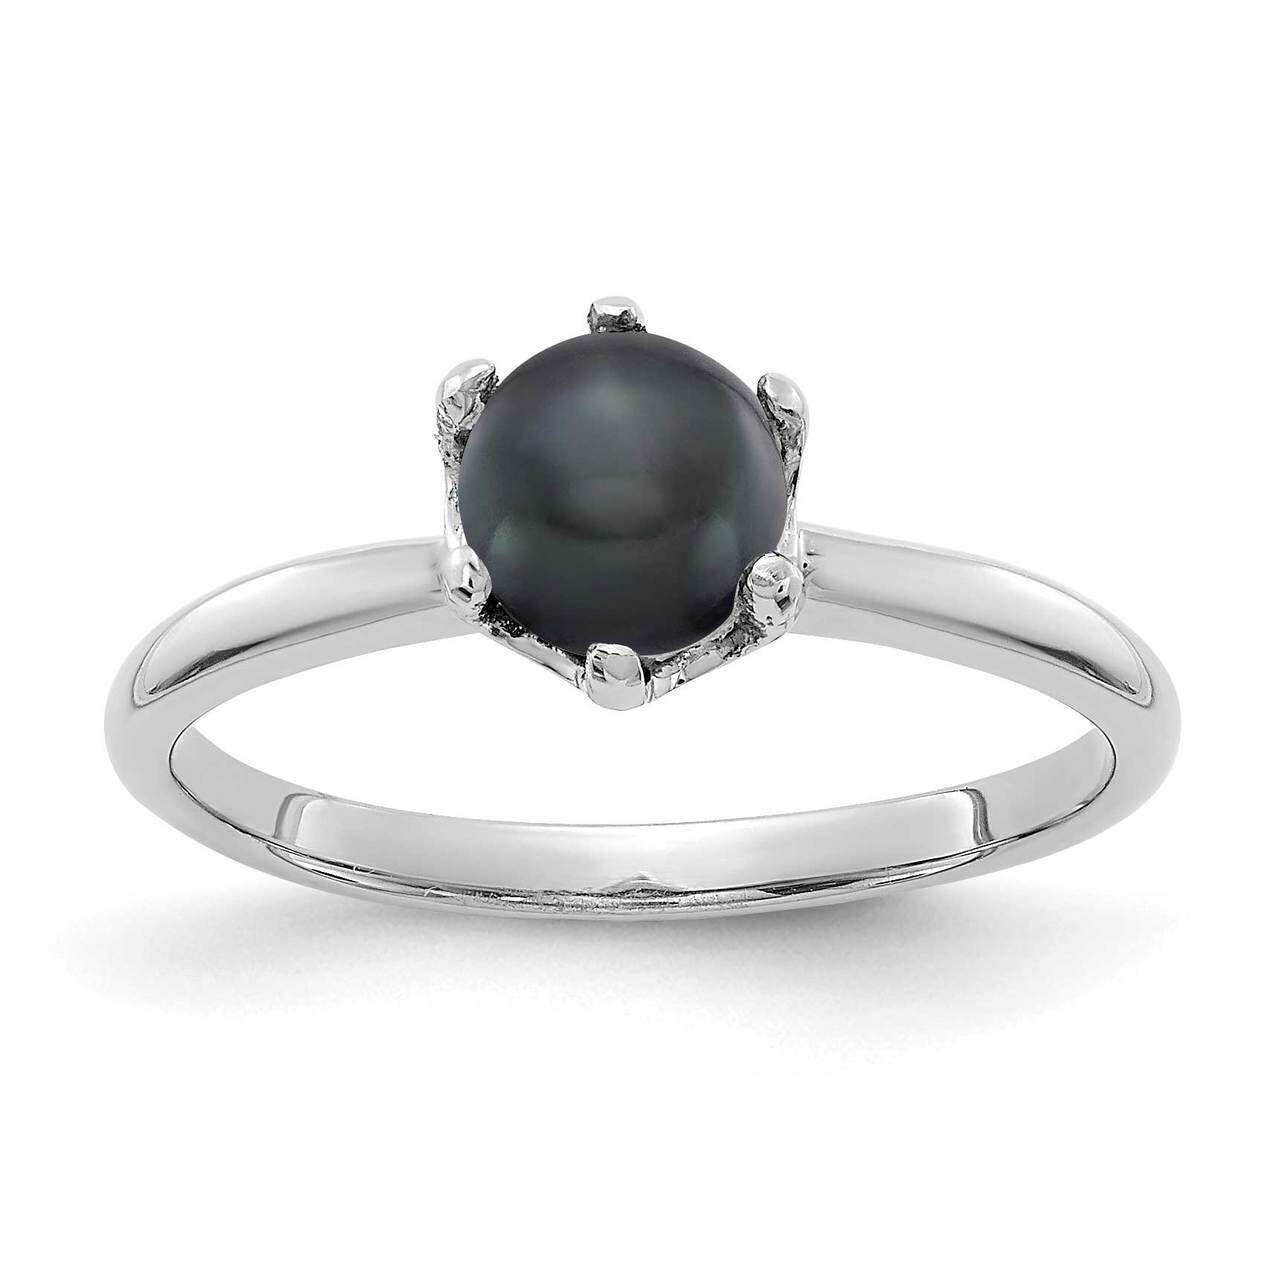 5.5mm Black Freshwater Cultured Pearl Ring 14k White Gold Y4353BP